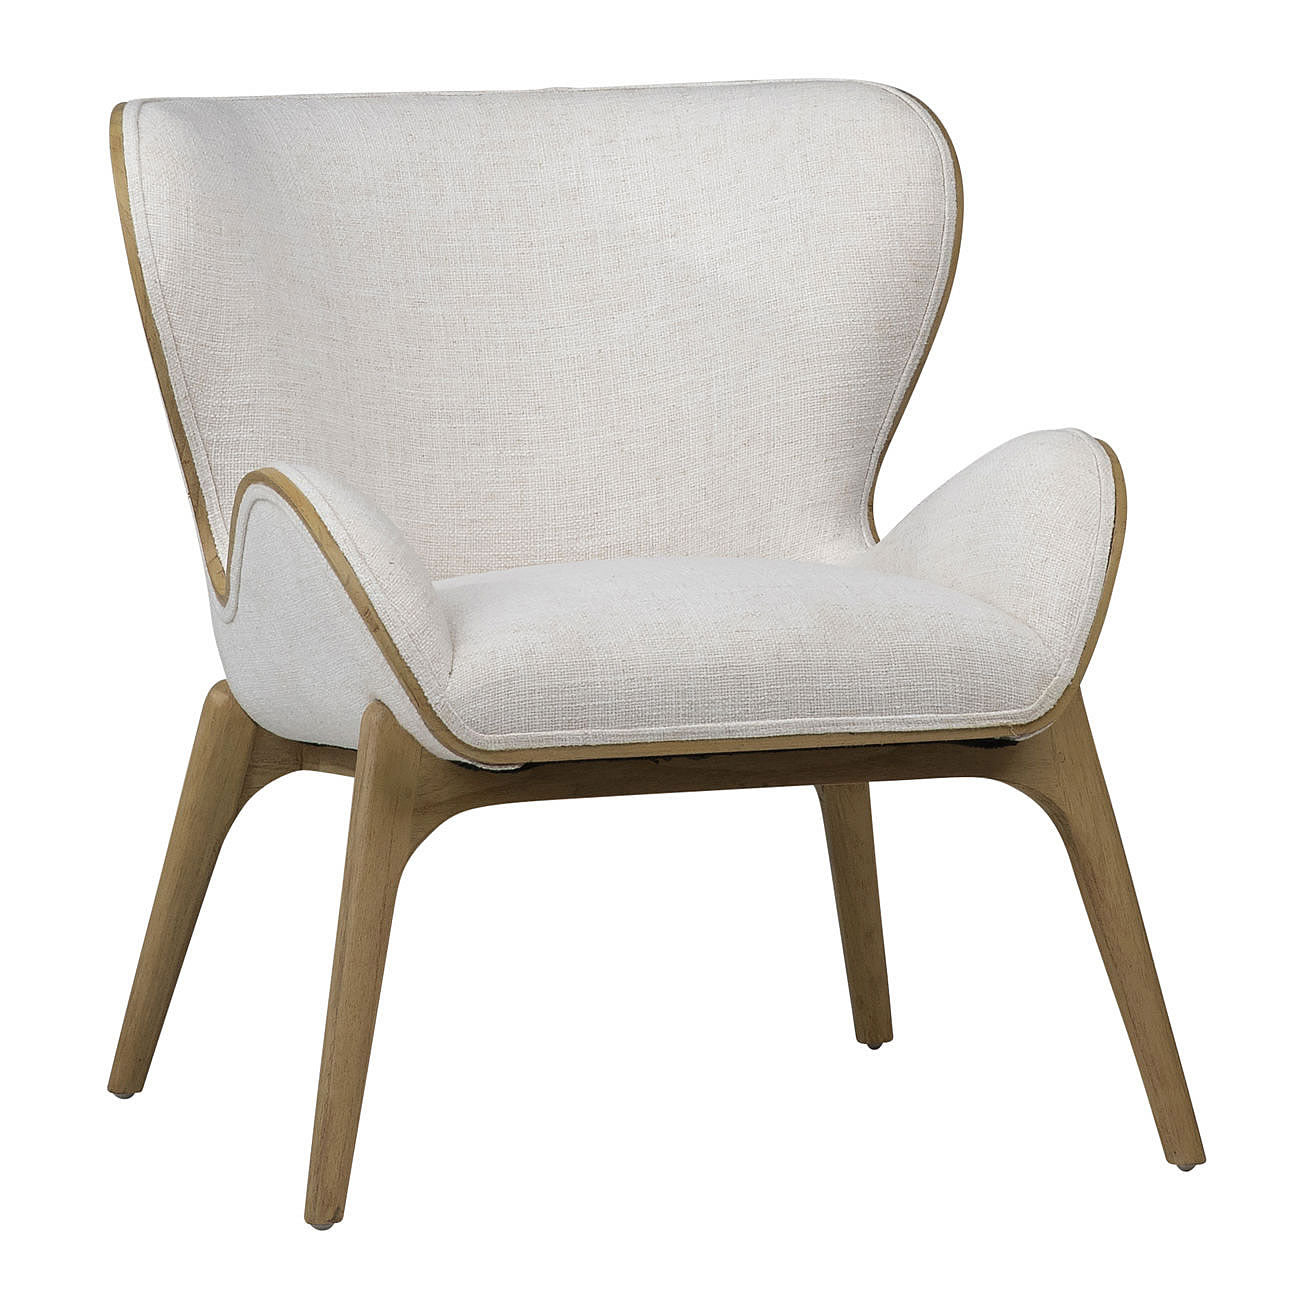 avayanna-occasional-chair-in-mindy-wood-poly-blend-upholstery